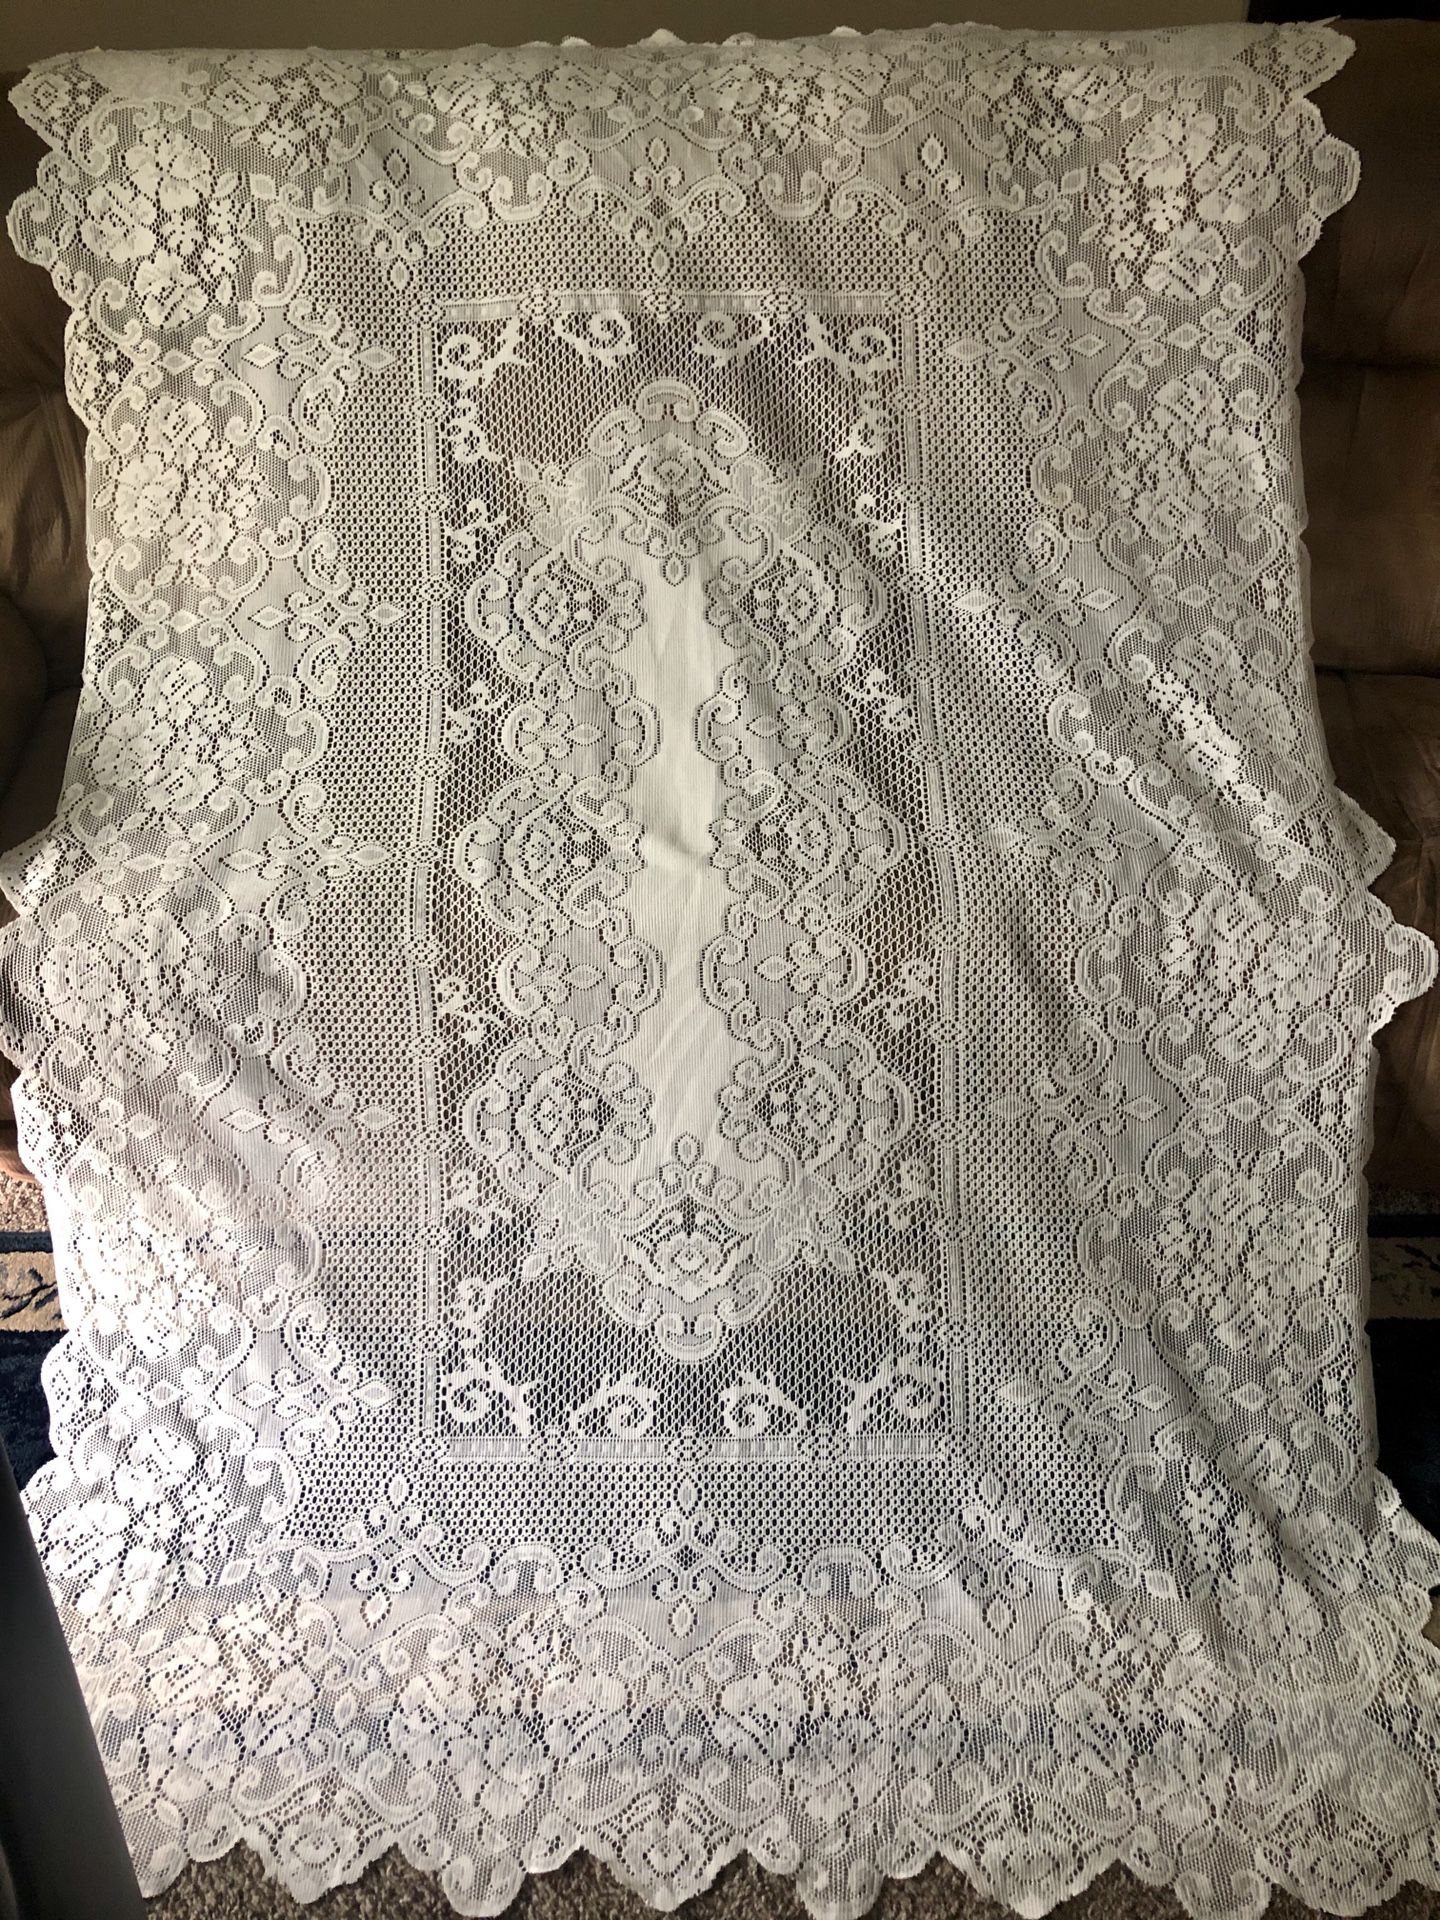 Beautiful off white lace tablecloth in excellent condition! 58 x 84”